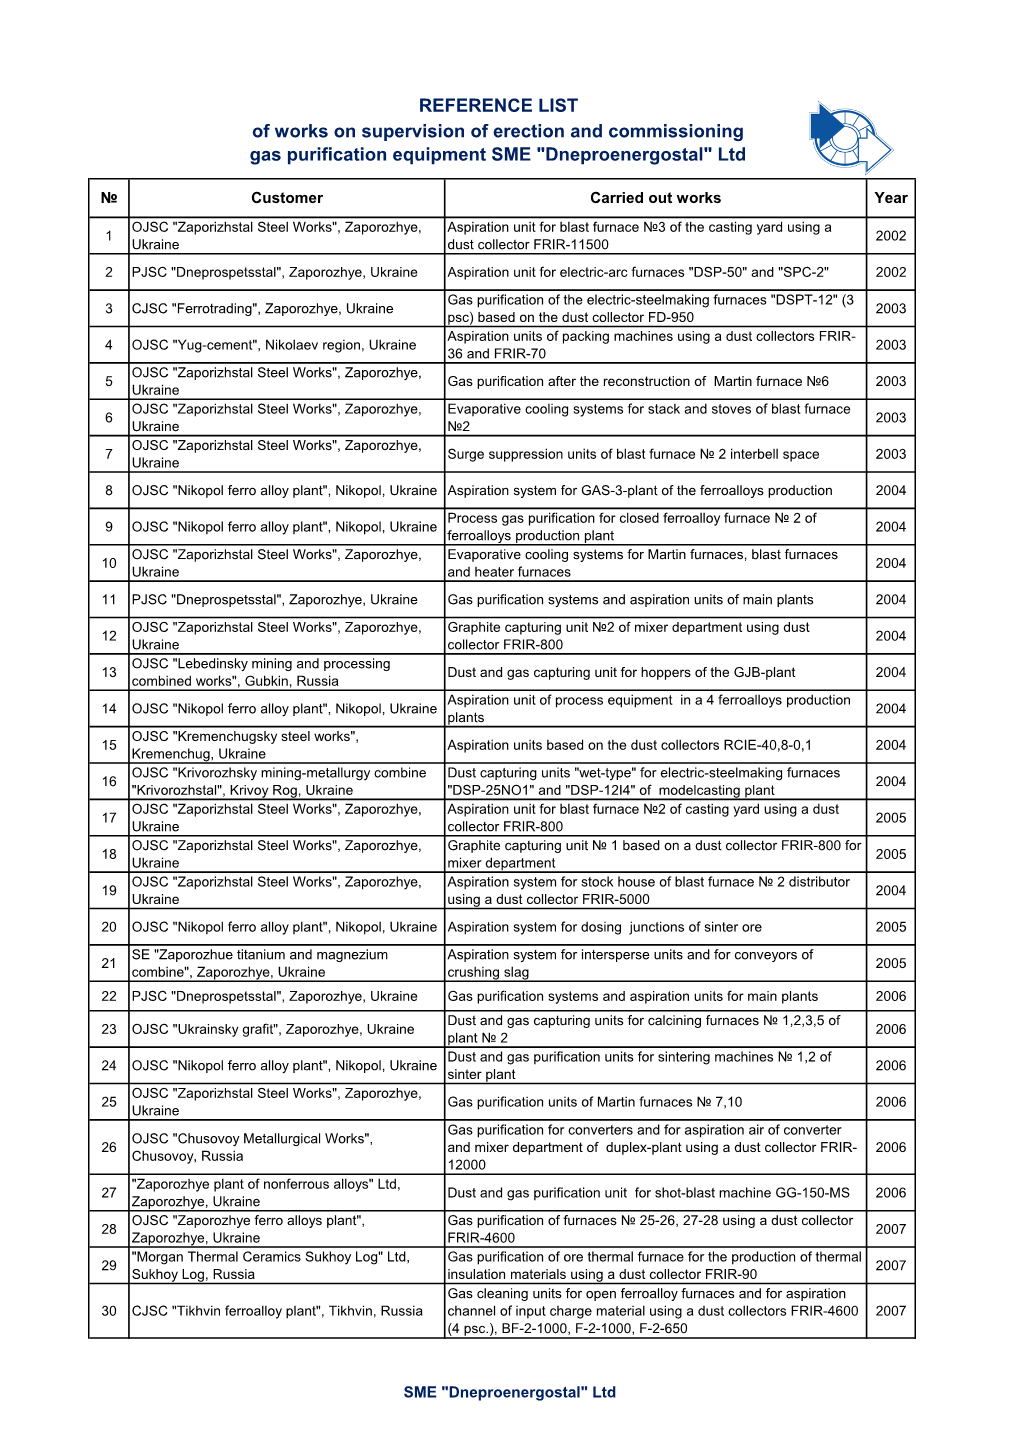 REFERENCE LIST of Works on Supervision of Erection and Commissioning Gas Purification Equipment SME "Dneproenergostal" Ltd